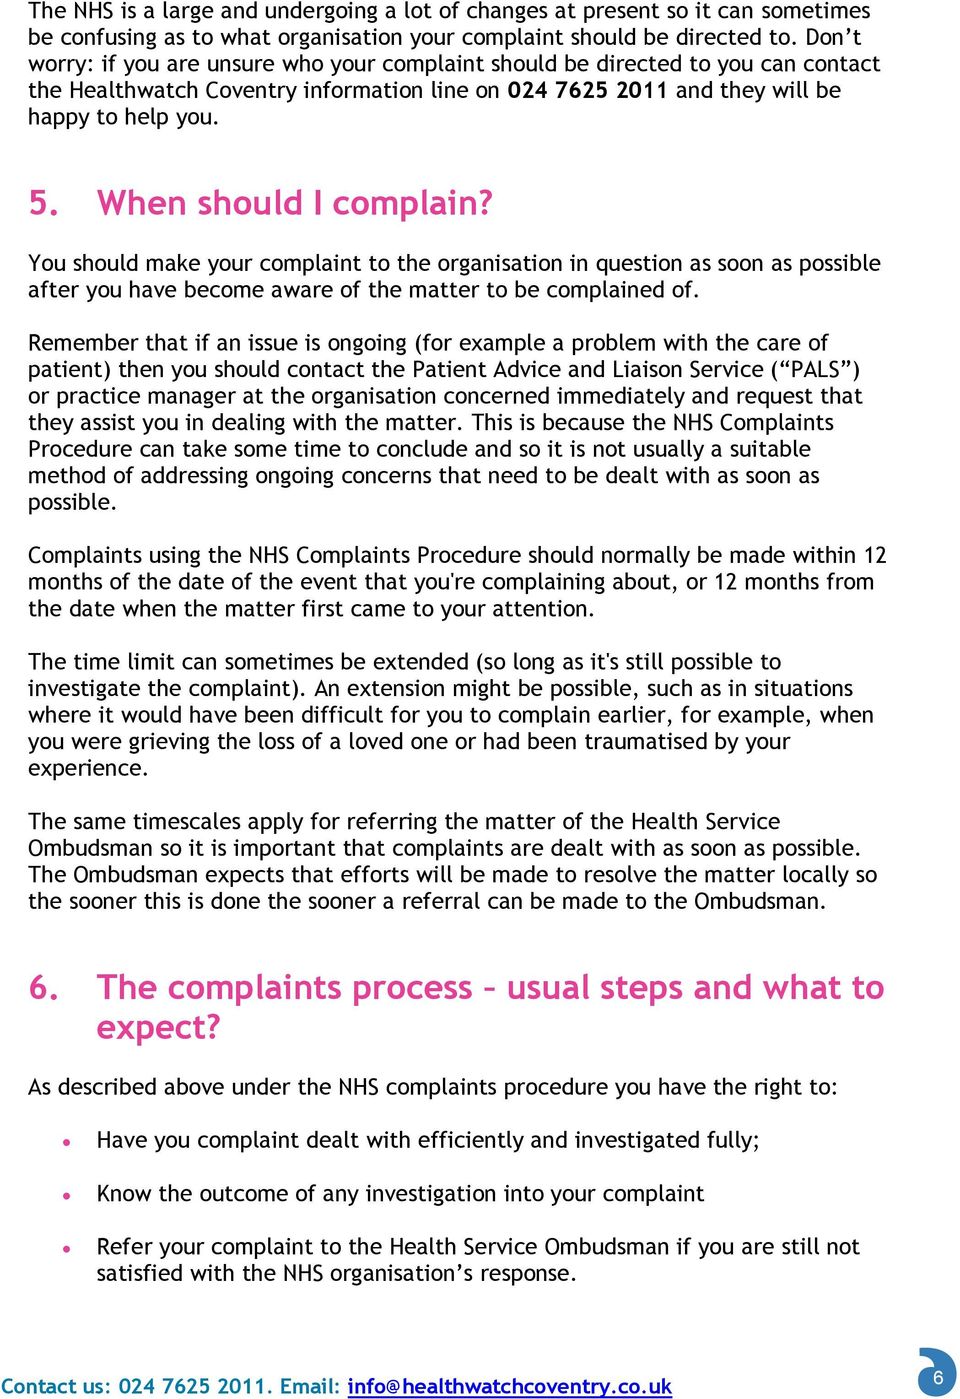 When should I complain? You should make your complaint to the organisation in question as soon as possible after you have become aware of the matter to be complained of.